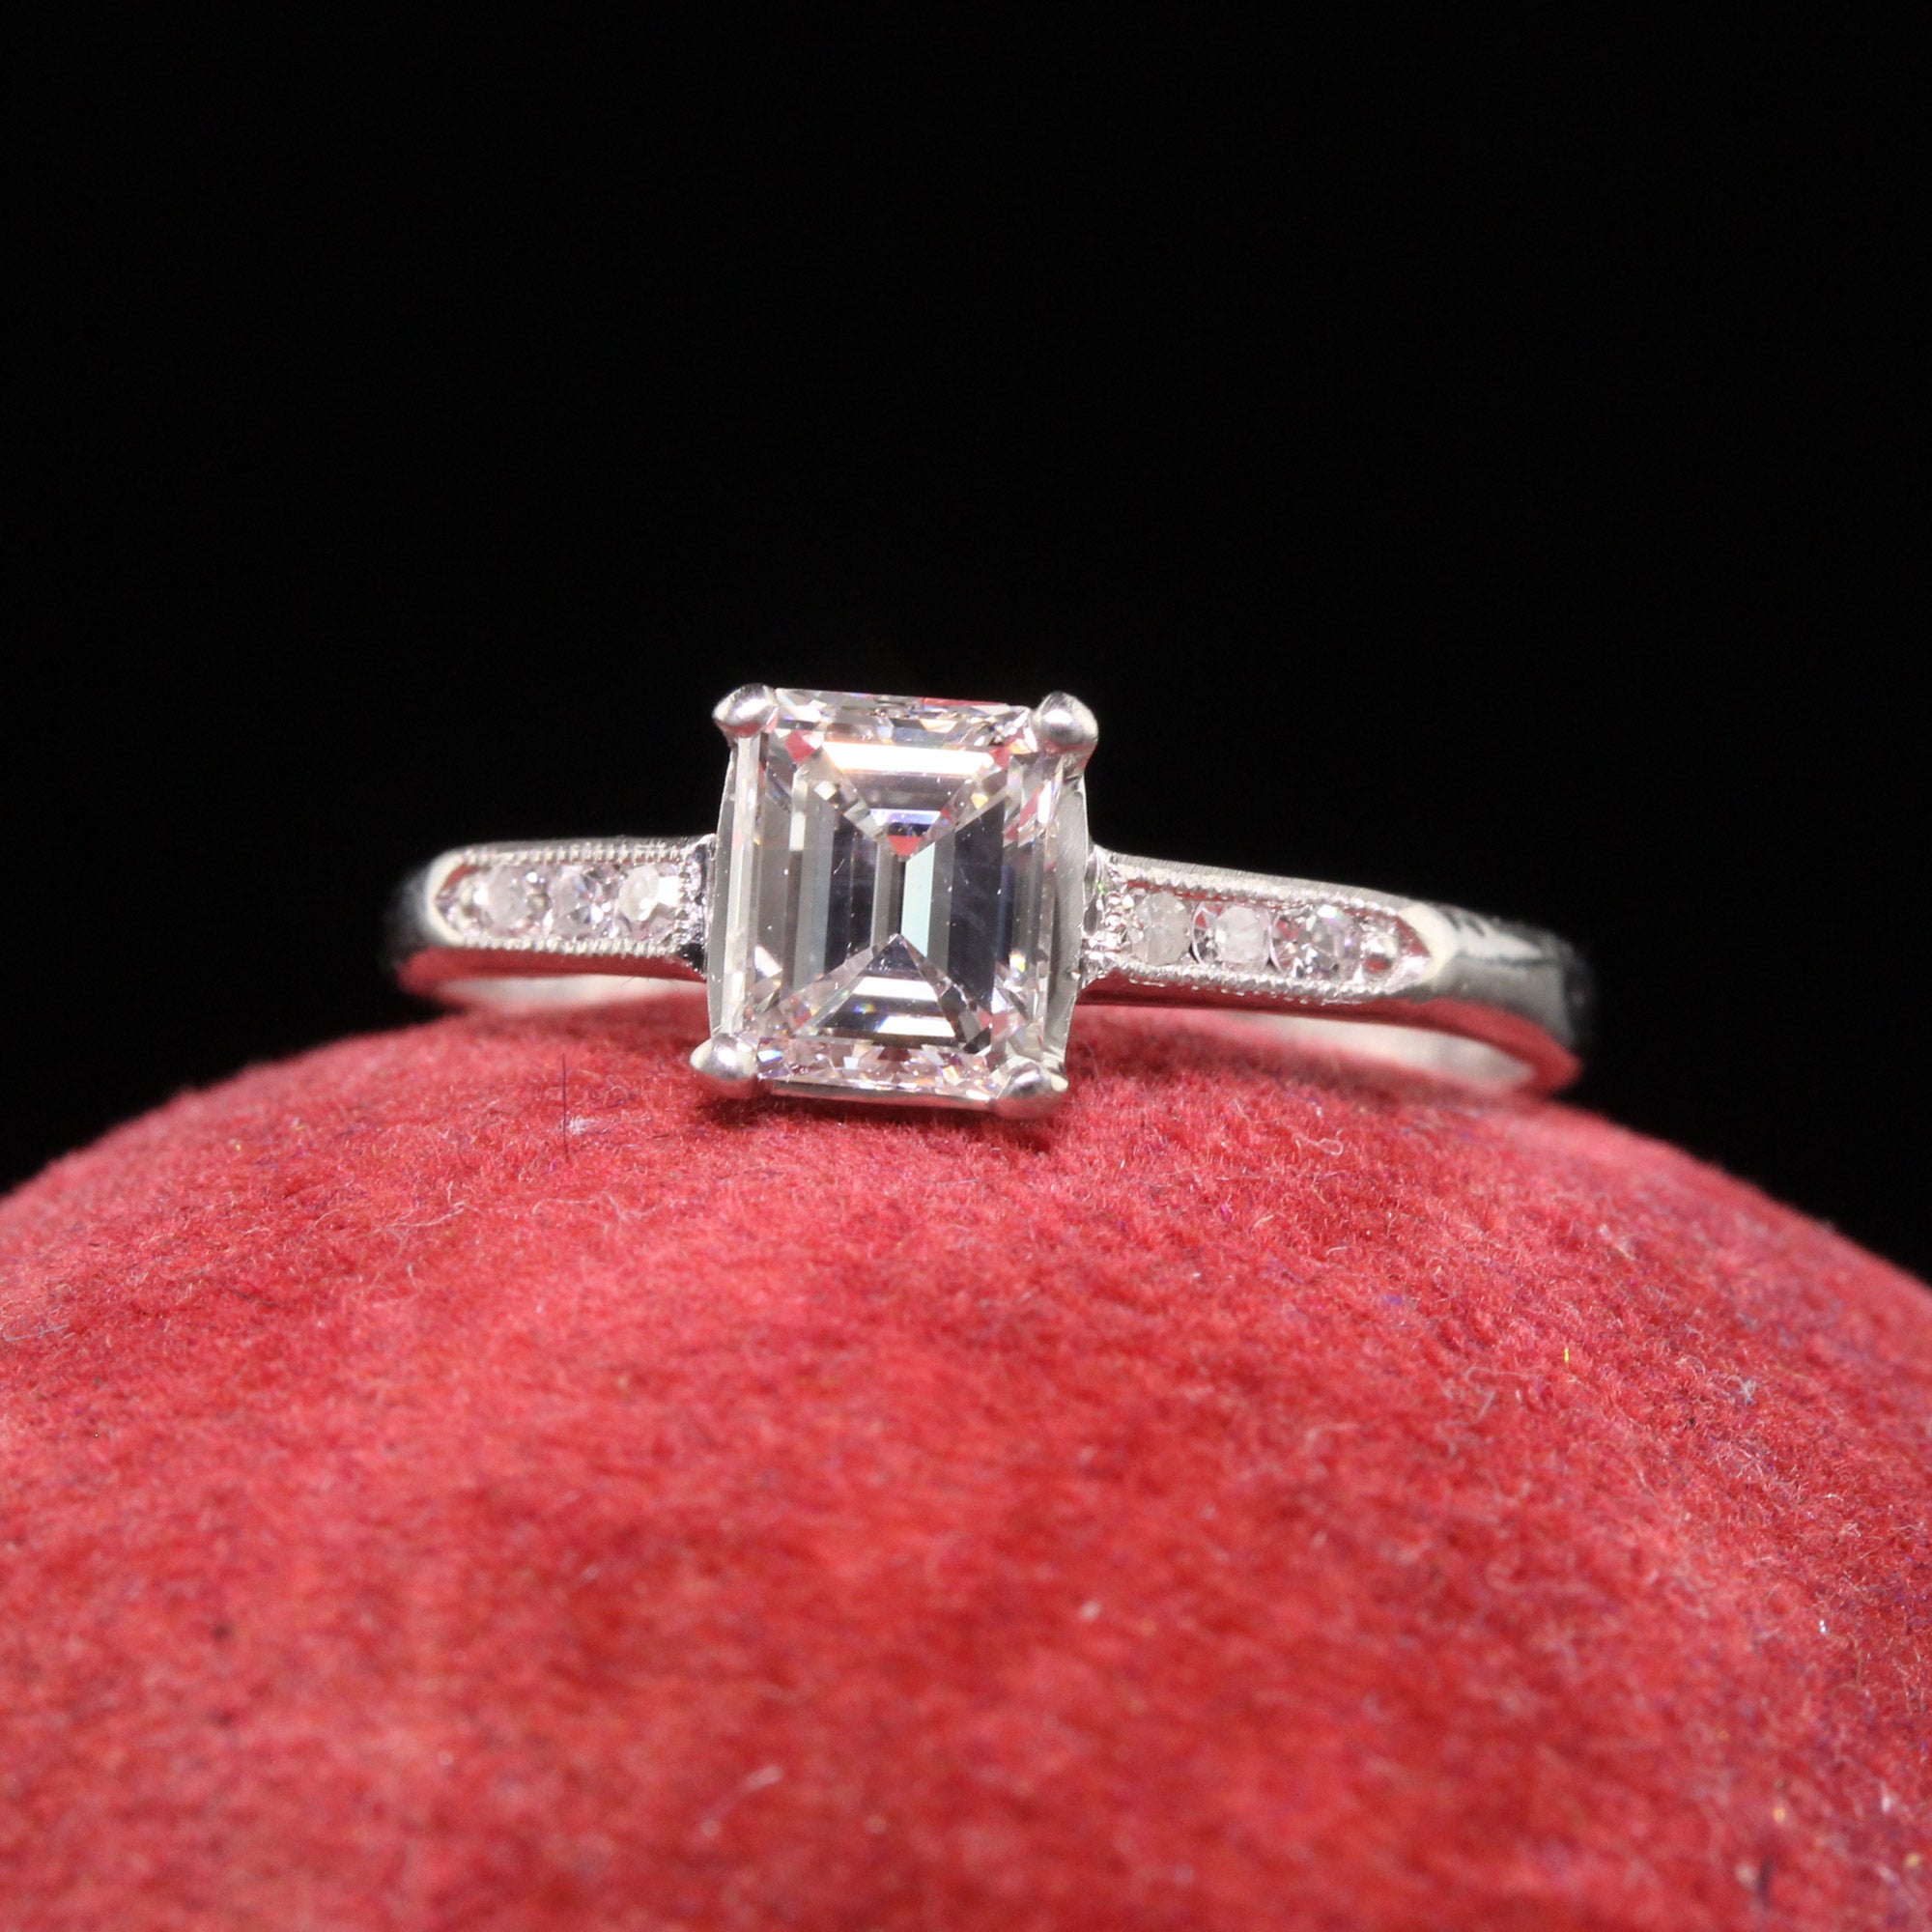 Beautiful Antique Art Deco Platinum Emerald Cut Diamond Classic Engagement Ring. This beautiful engagement is crafted in platinum. The center holds an old emerald cut diamond that has a GIA report. The diamond is set in a classic art deco mounting